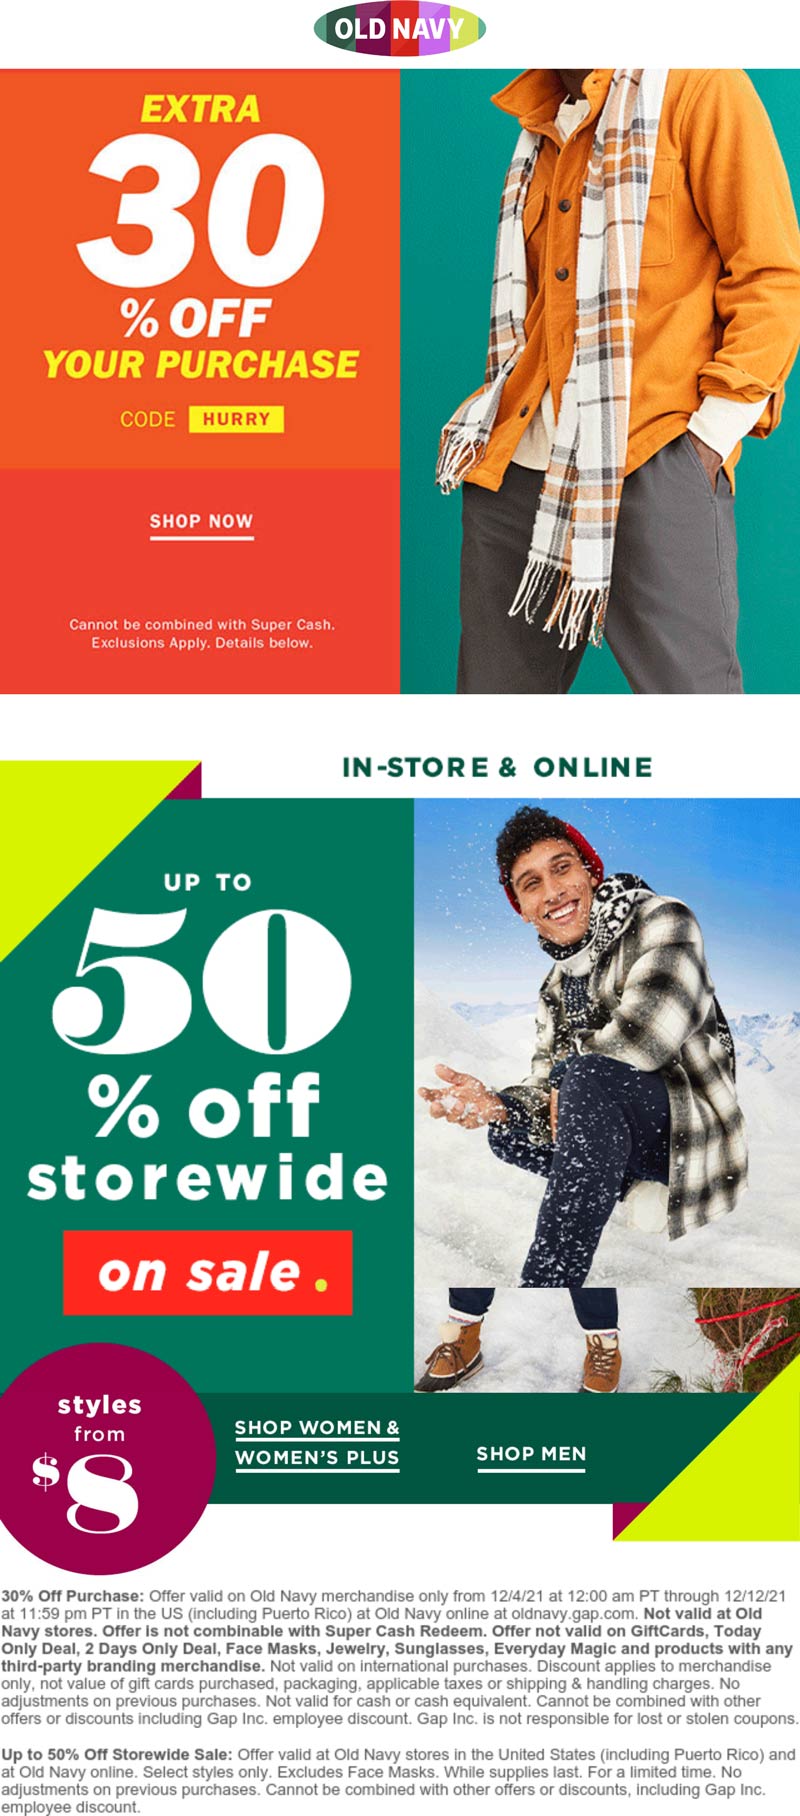 Old Navy stores Coupon  30% off online at Old Navy via promo code HURRY #oldnavy 